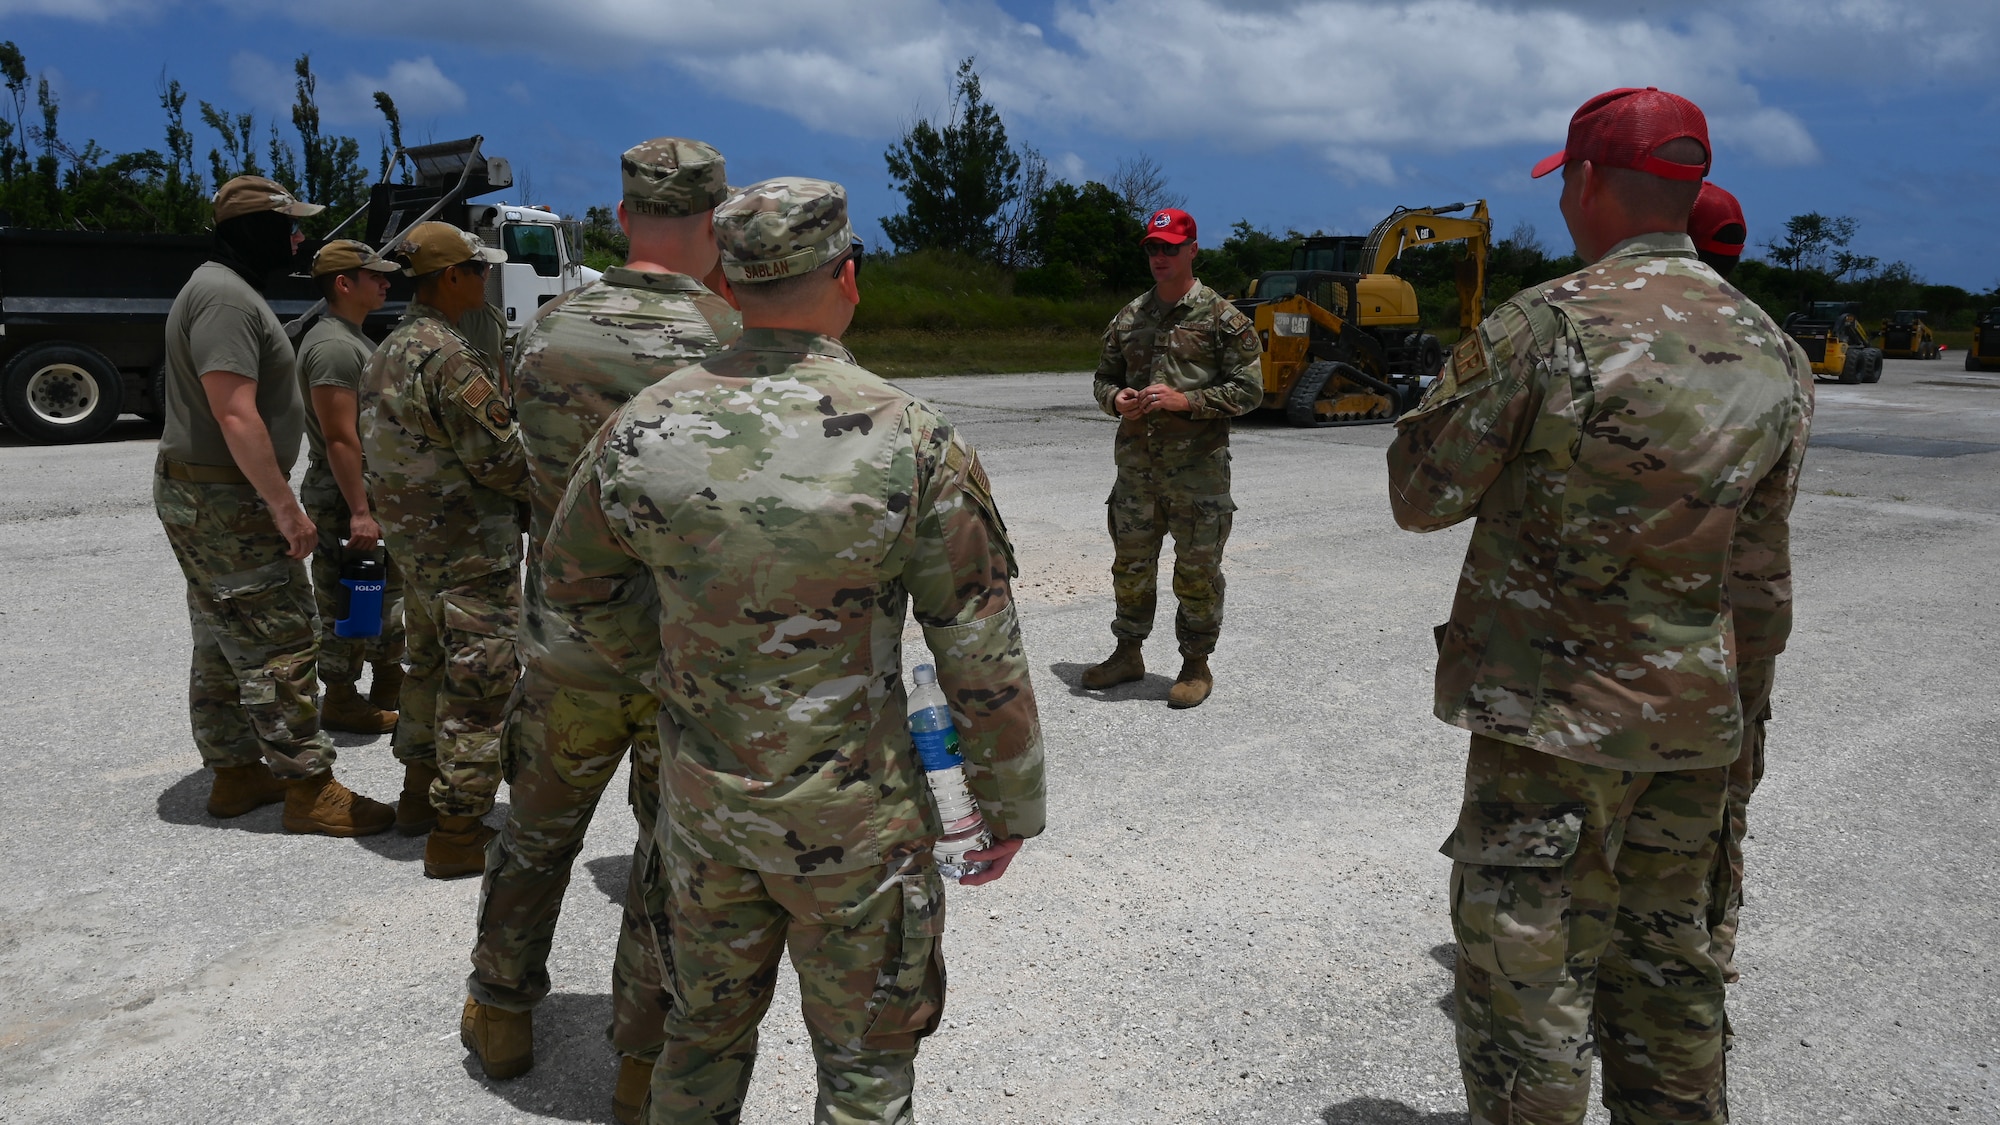 An Airman briefs a team on what is expected